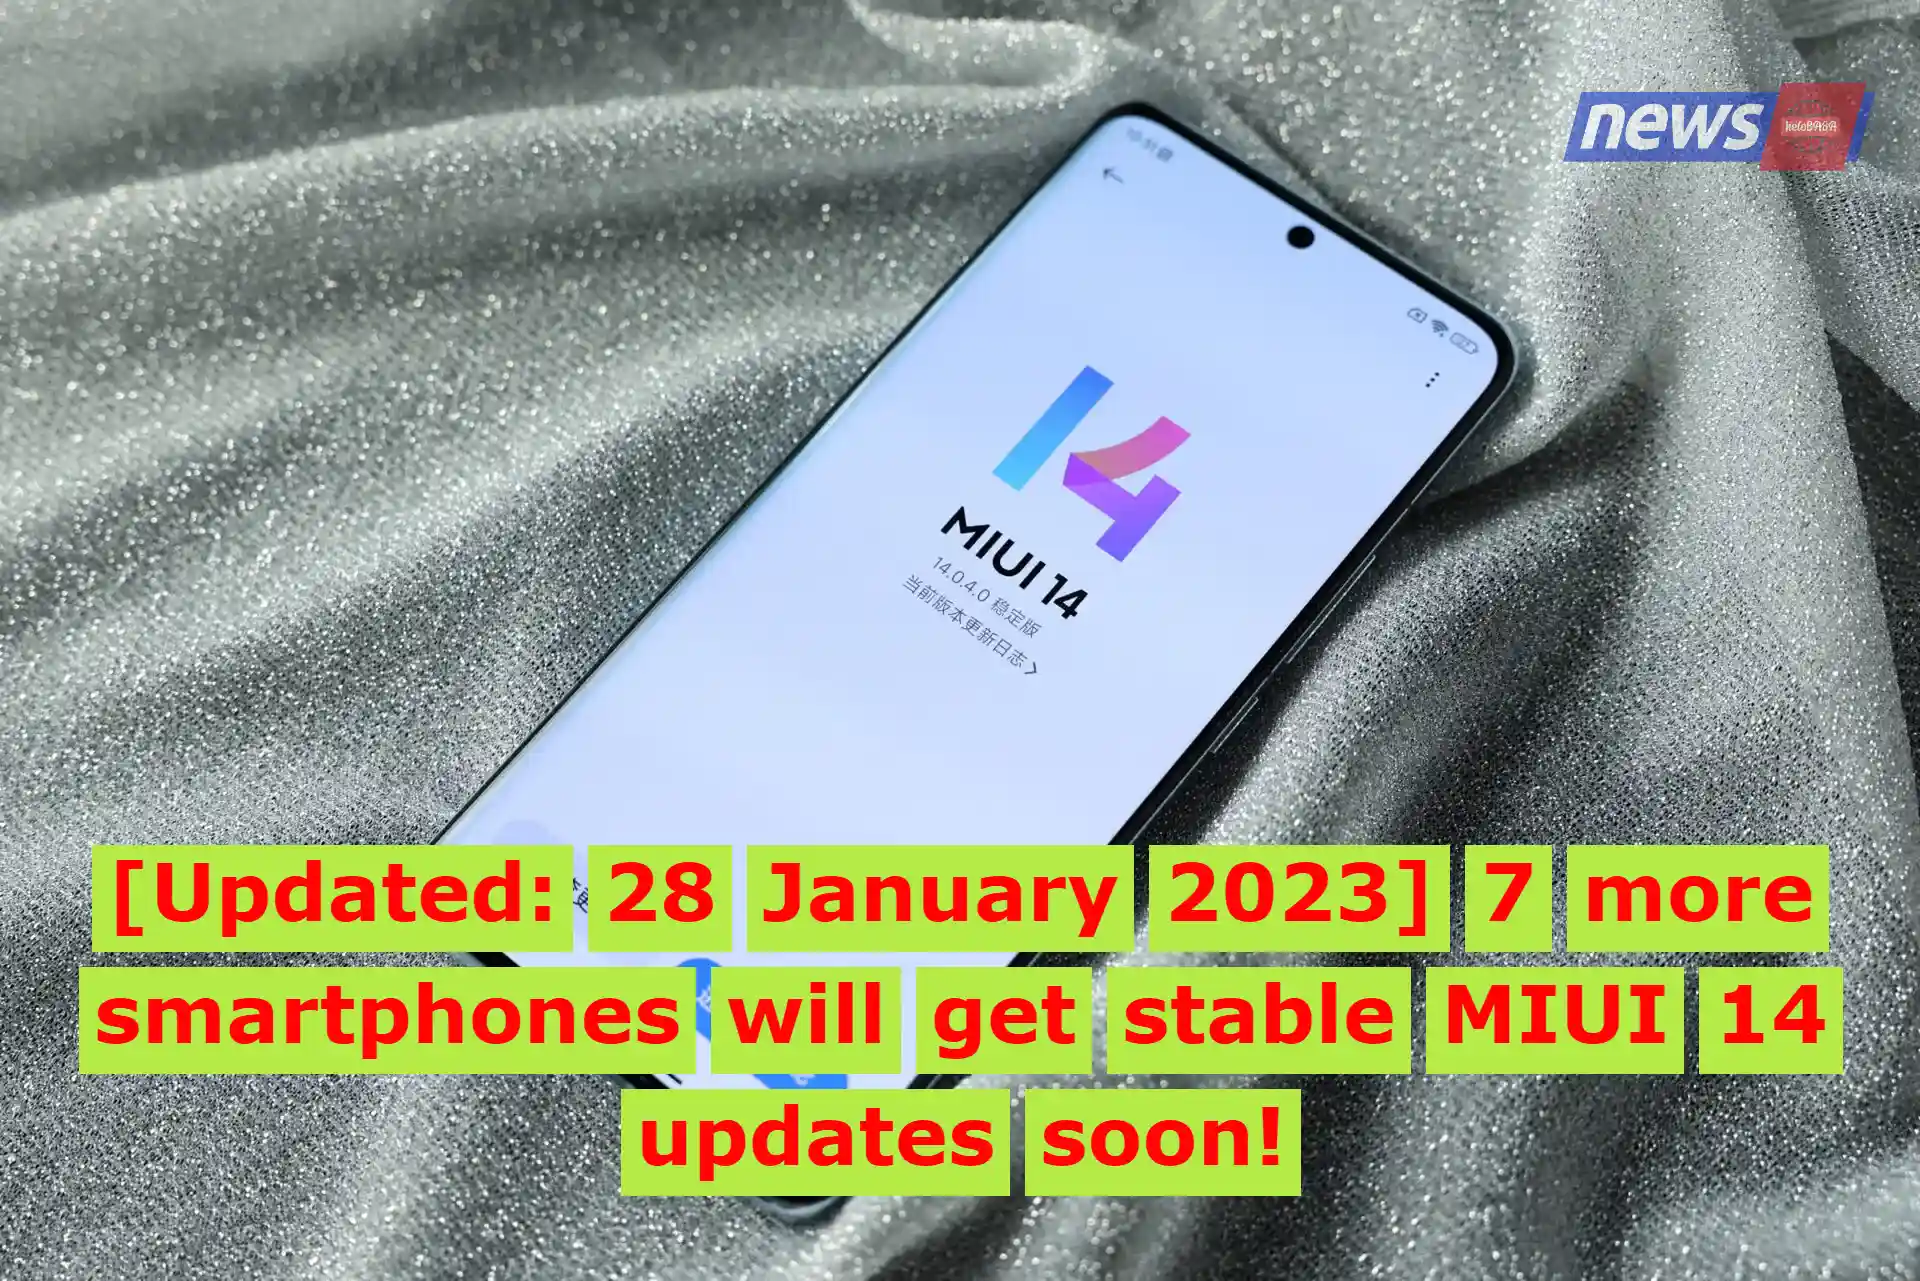 [Updated: 28 January 2023] 7 more smartphones will get stable MIUI 14 updates soon!